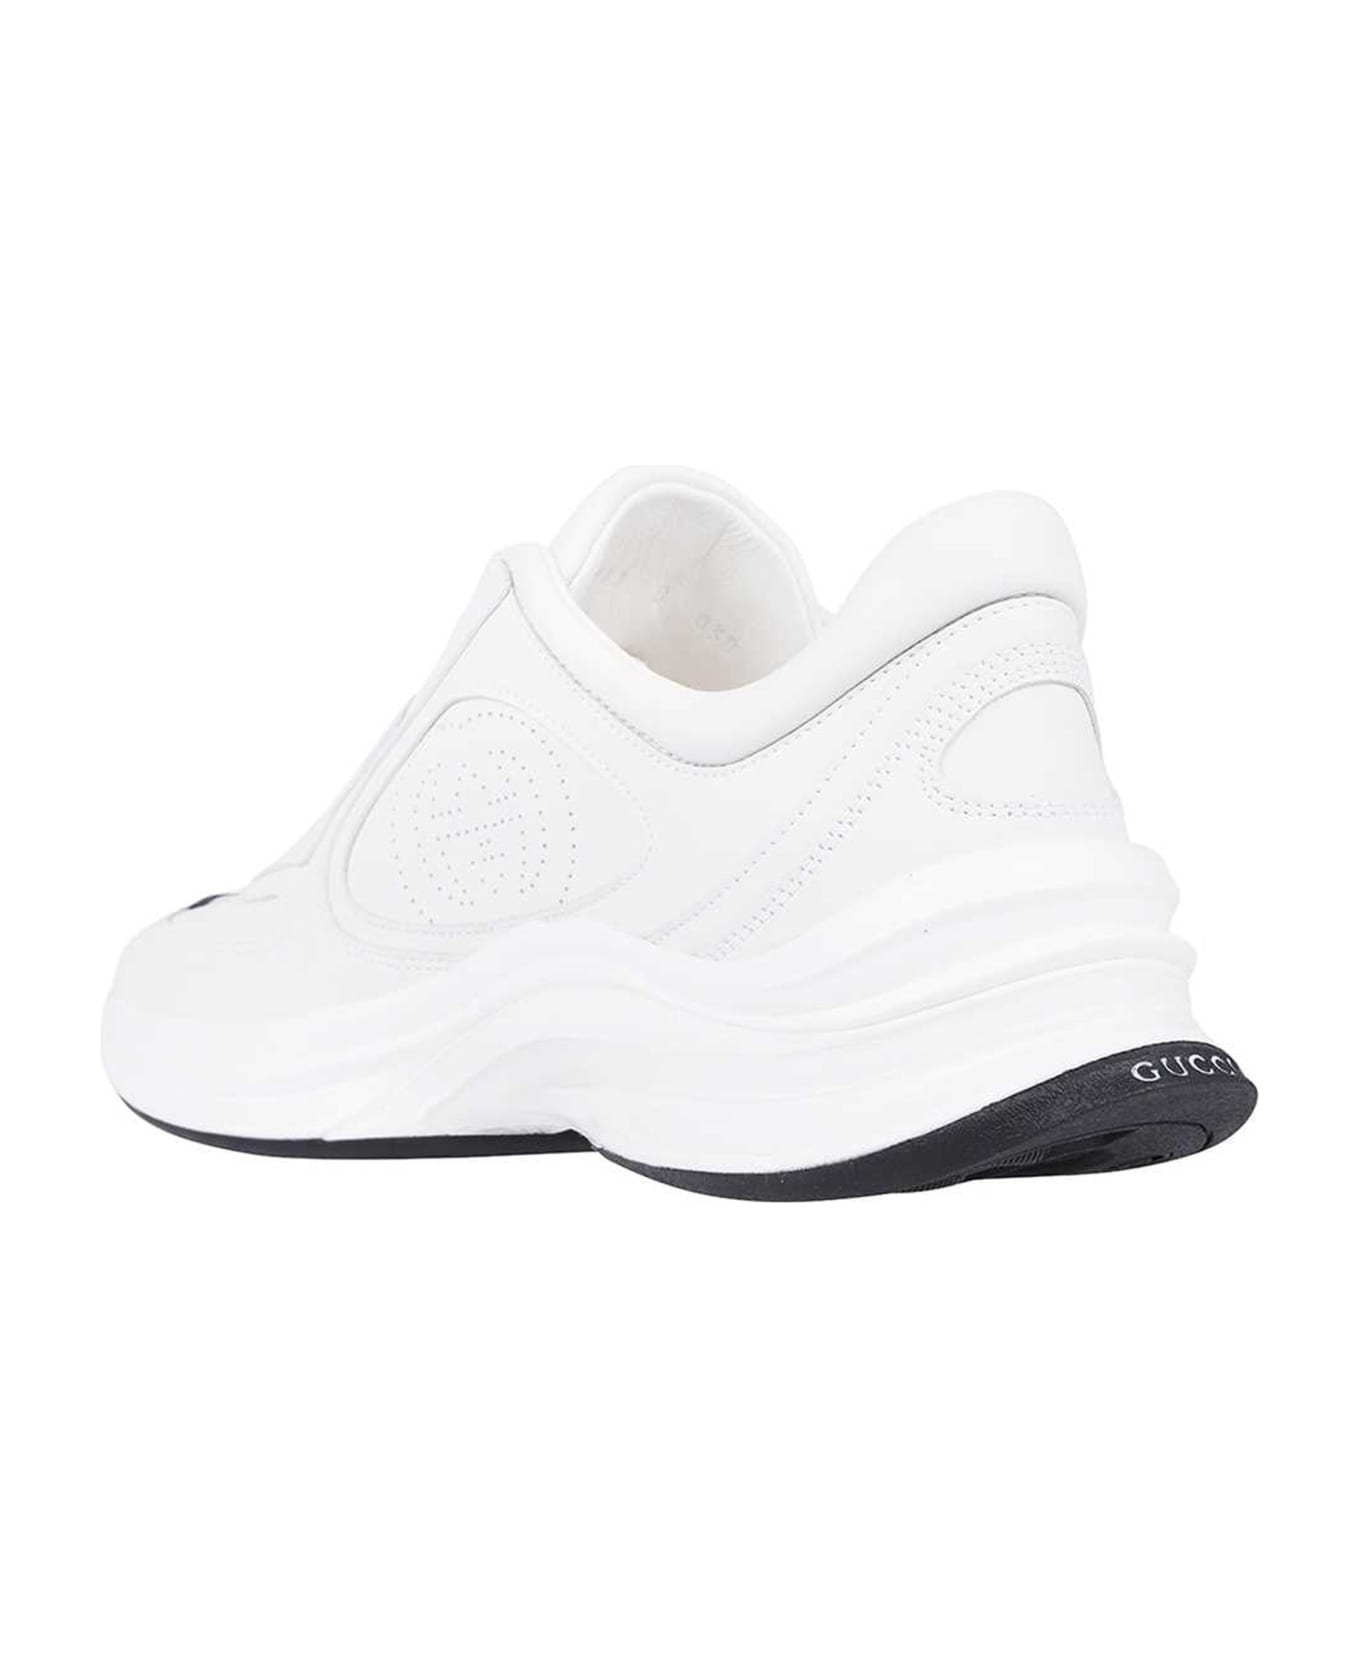 Gucci Run Leather Sneakers - White スニーカー